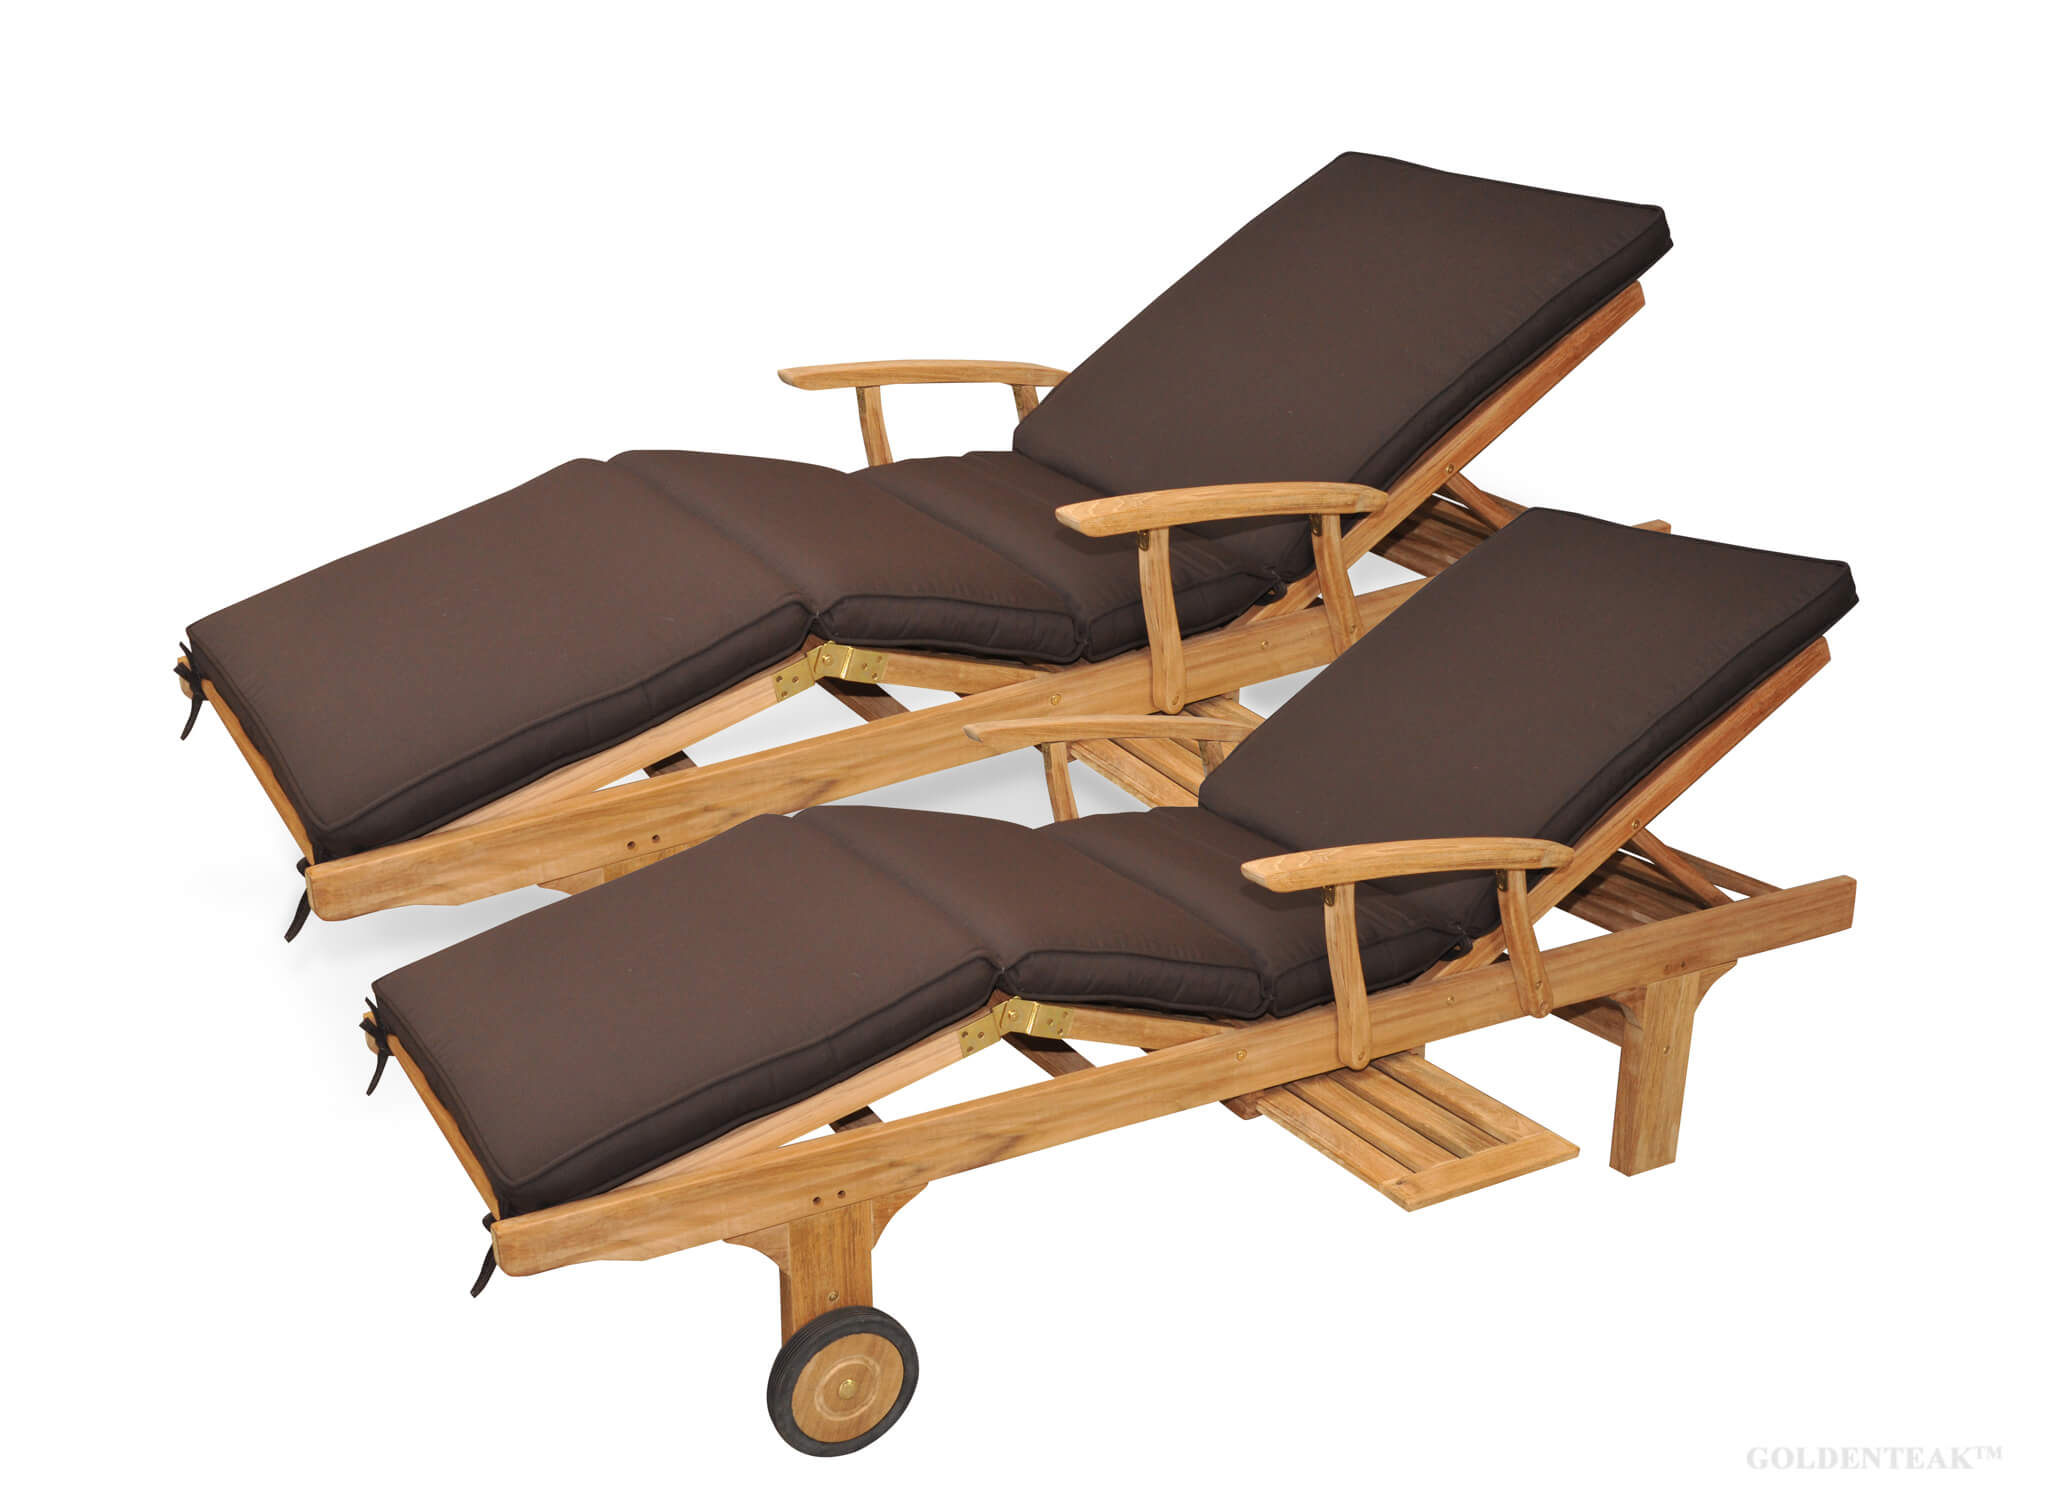 Teak Chaise Lounge Sun Lounger with Arms PAIR with Cushion